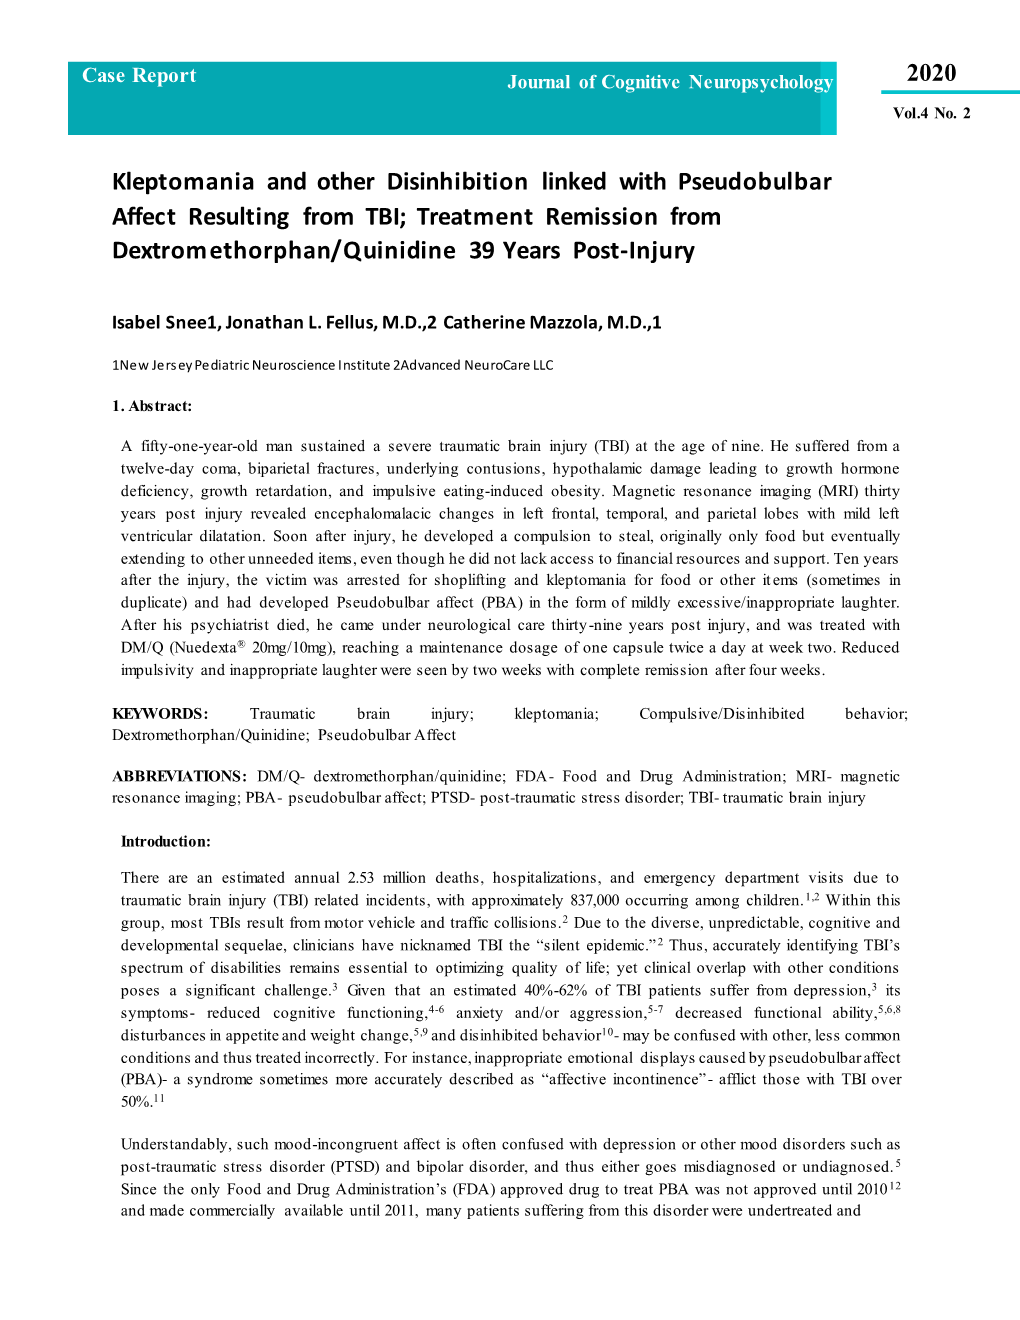 Kleptomania and Other Disinhibition Linked with Pseudobulbar Affect Resulting from TBI; Treatment Remission from Dextromethorphan/Quinidine 39 Years Post-Injury